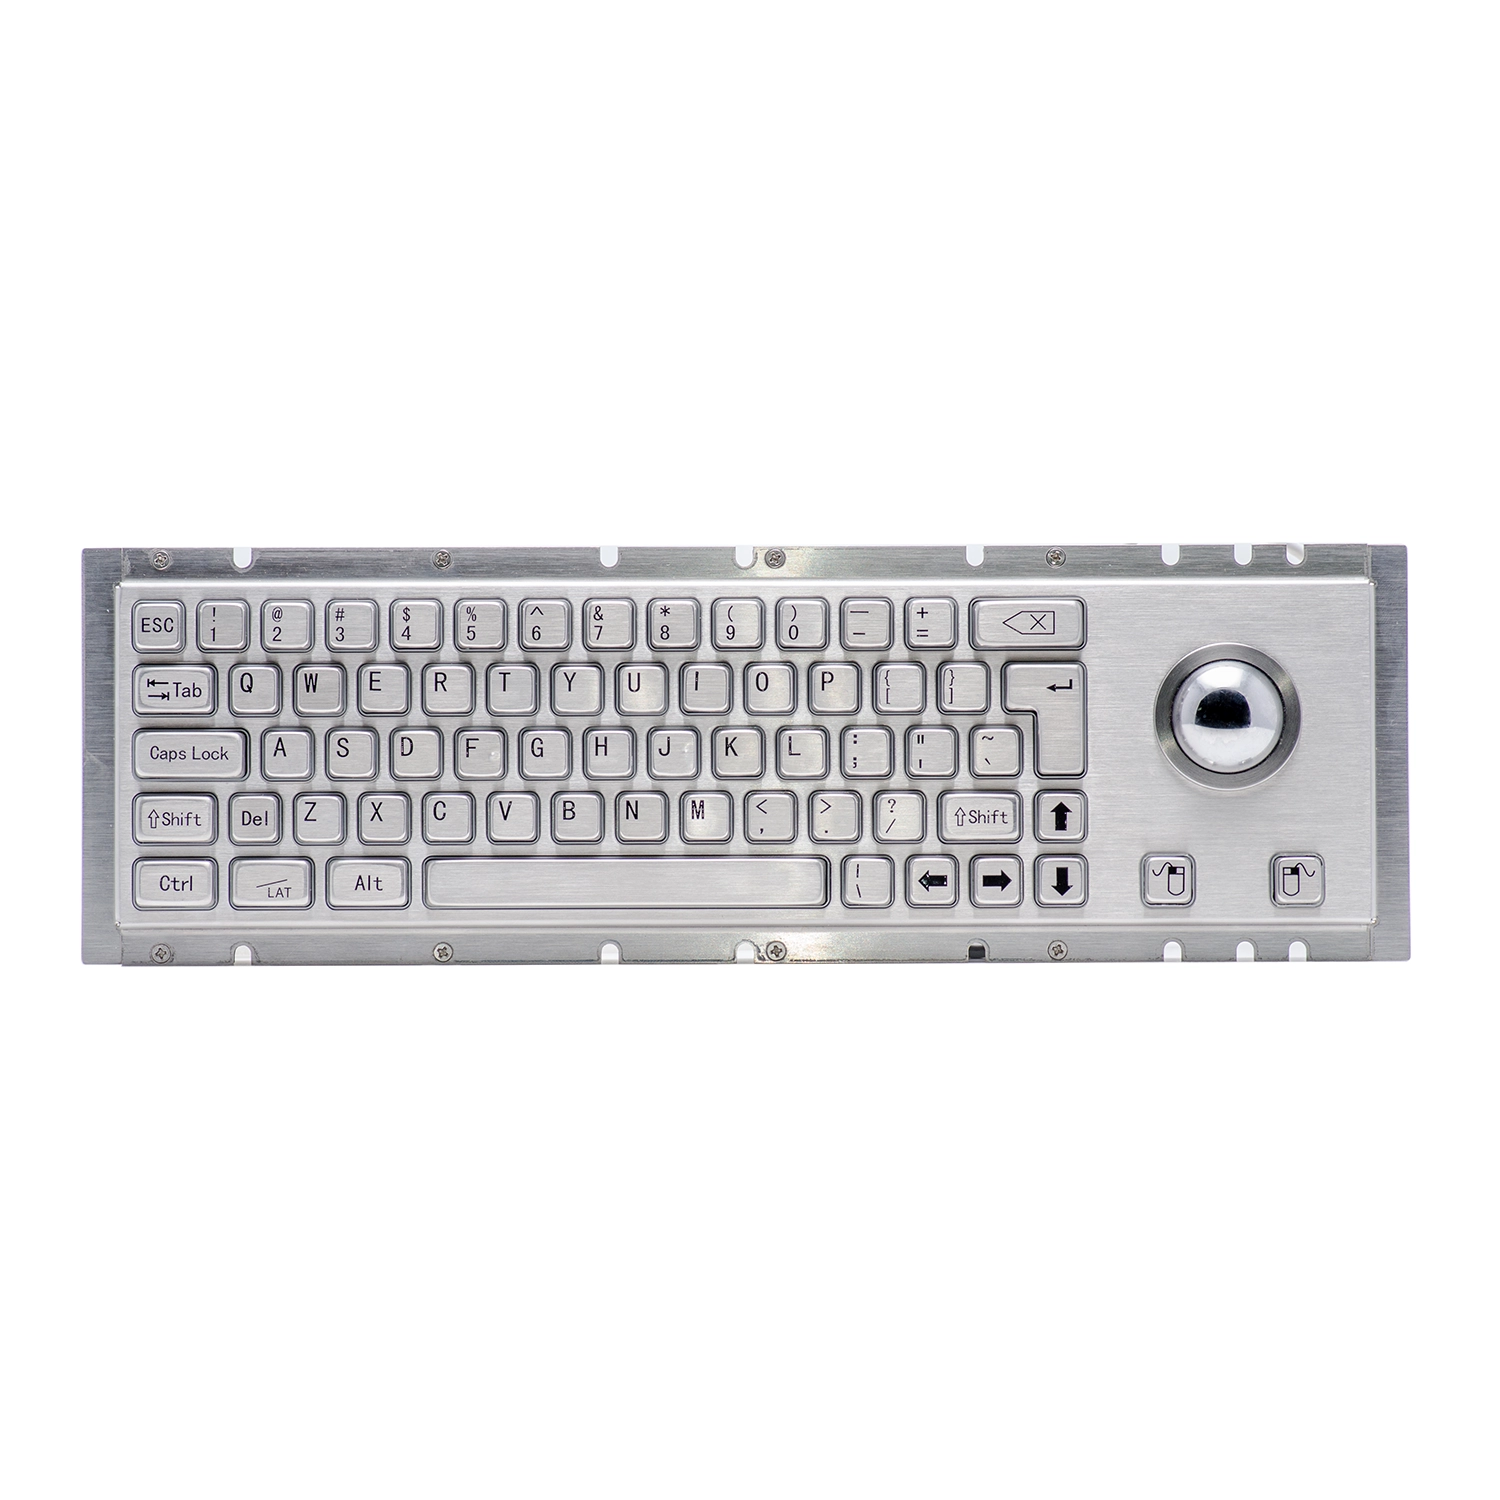 Rugged panel mount keyboard with trackball KB-000-NW0S0T11